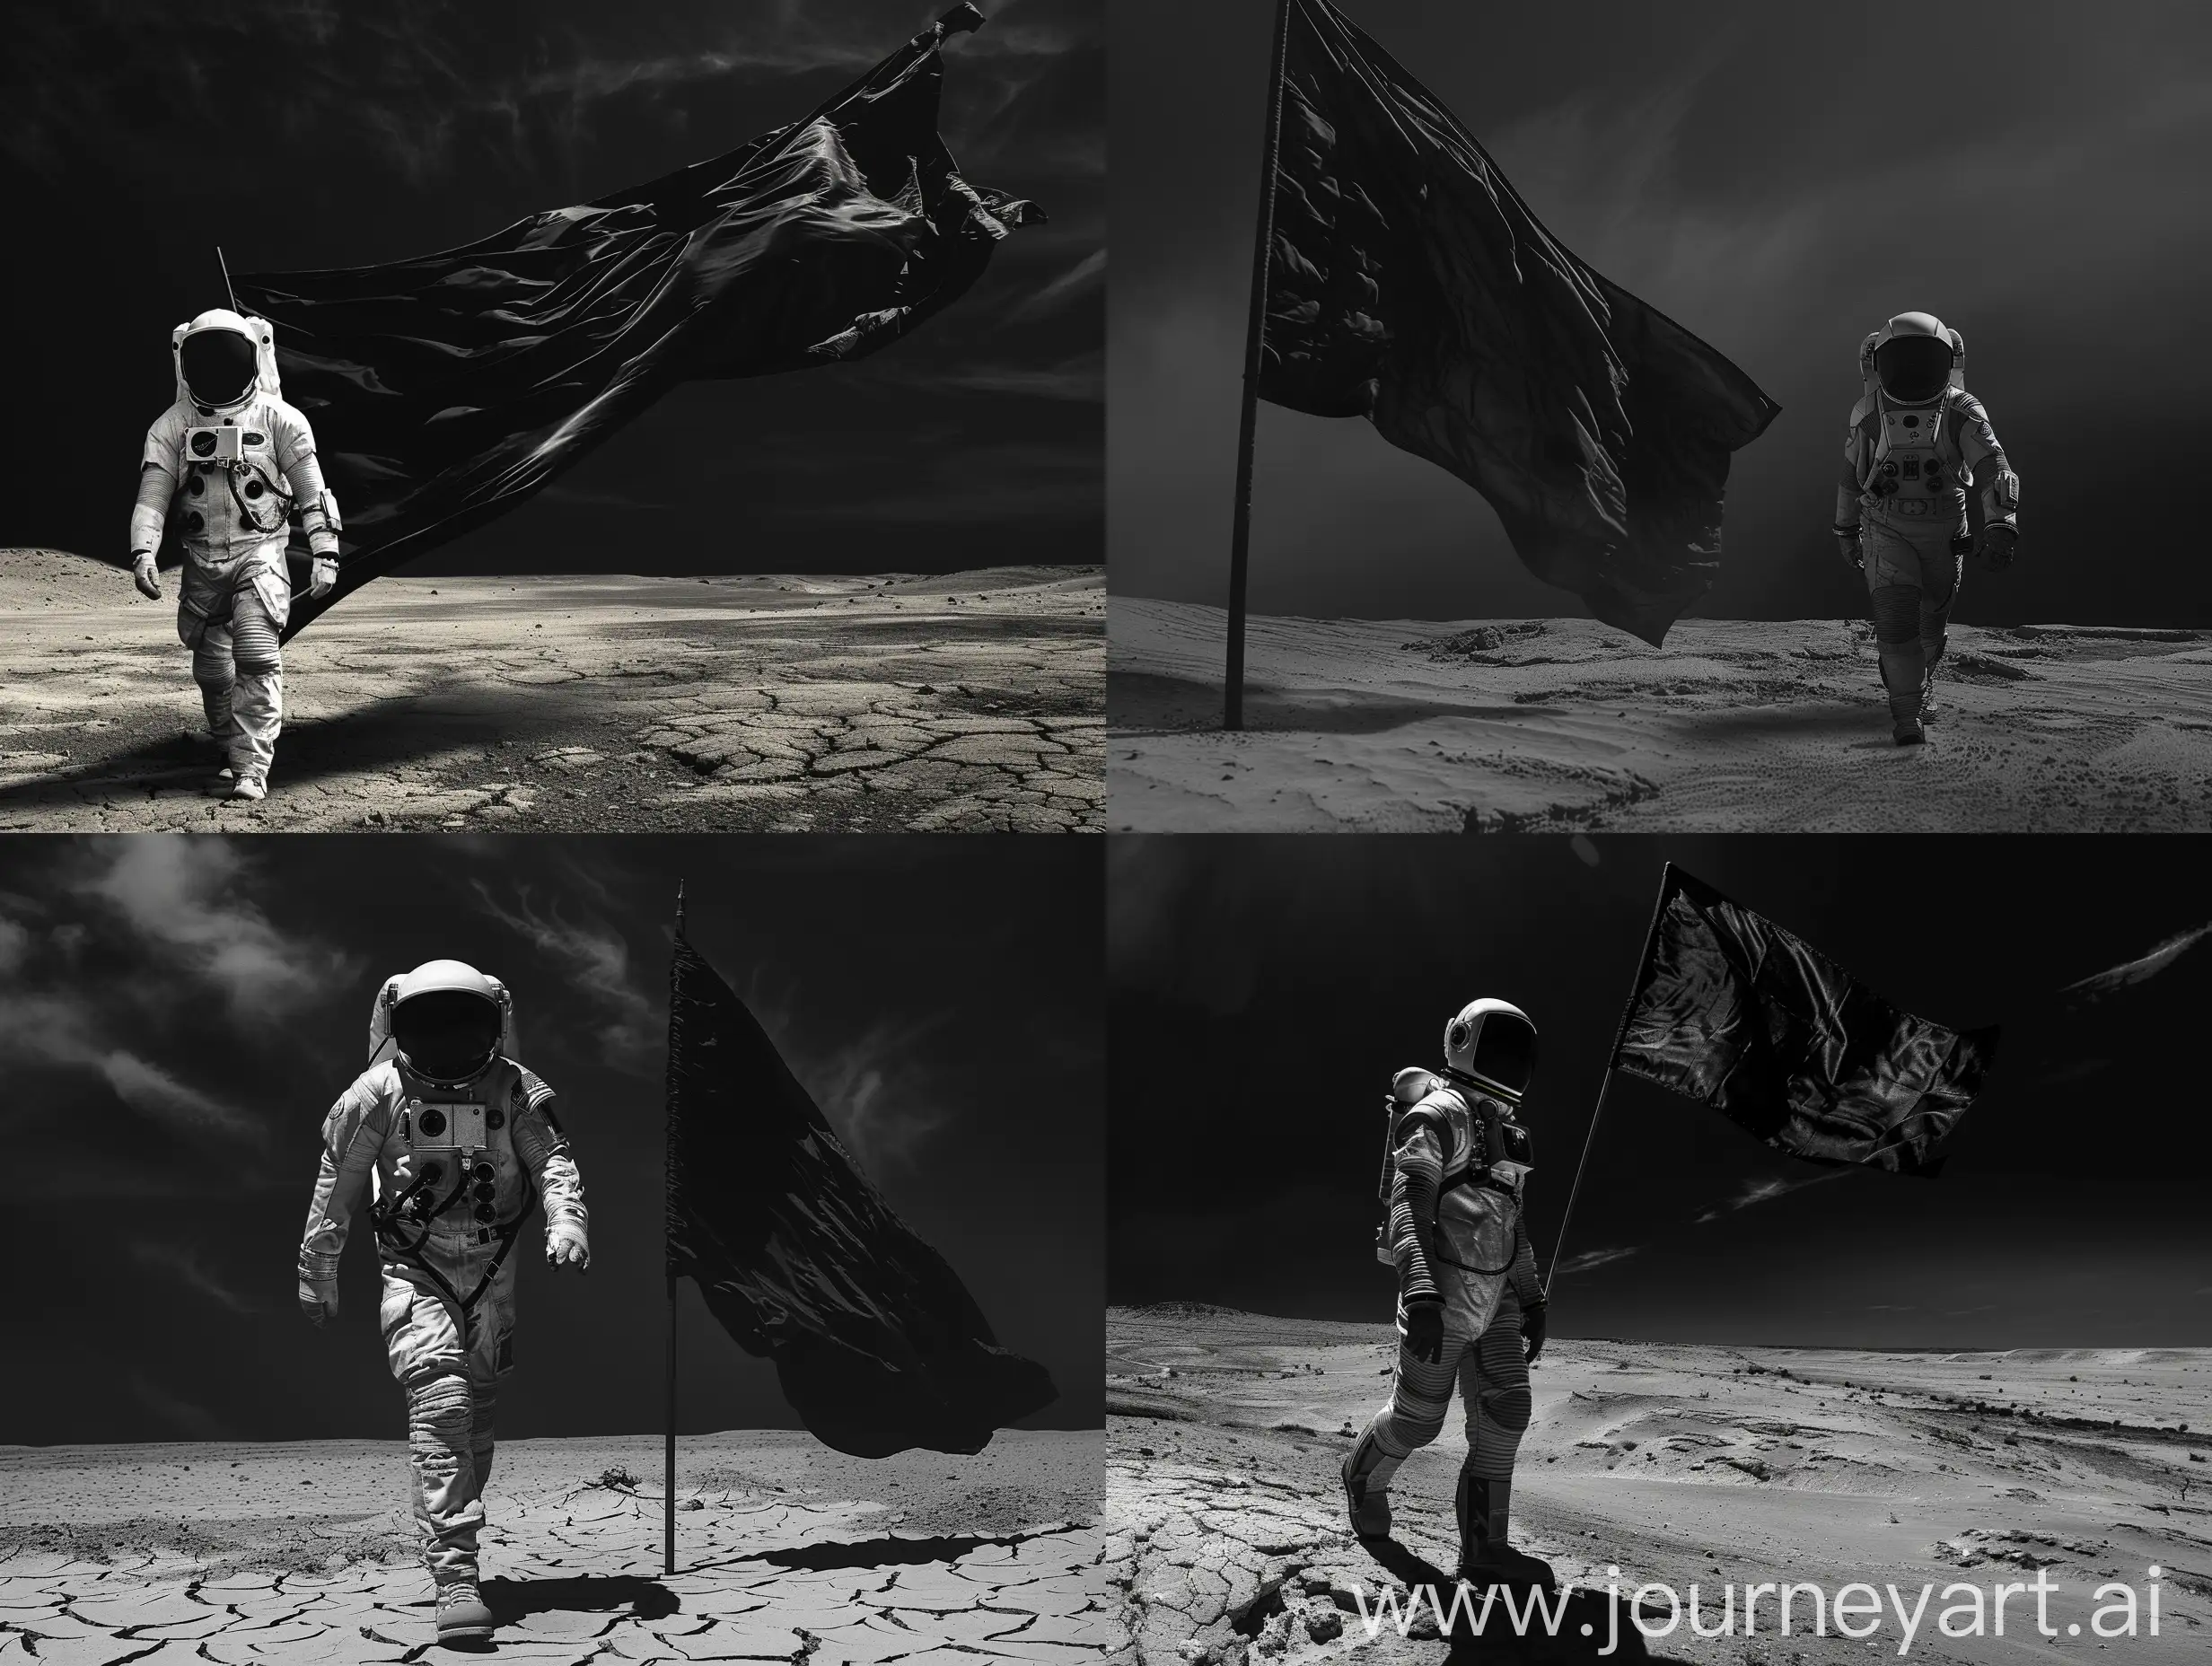 Man in astro suit, walking a distant dry land with a black flag. sky is black, no clouds. Black and white, dramatic lighting 